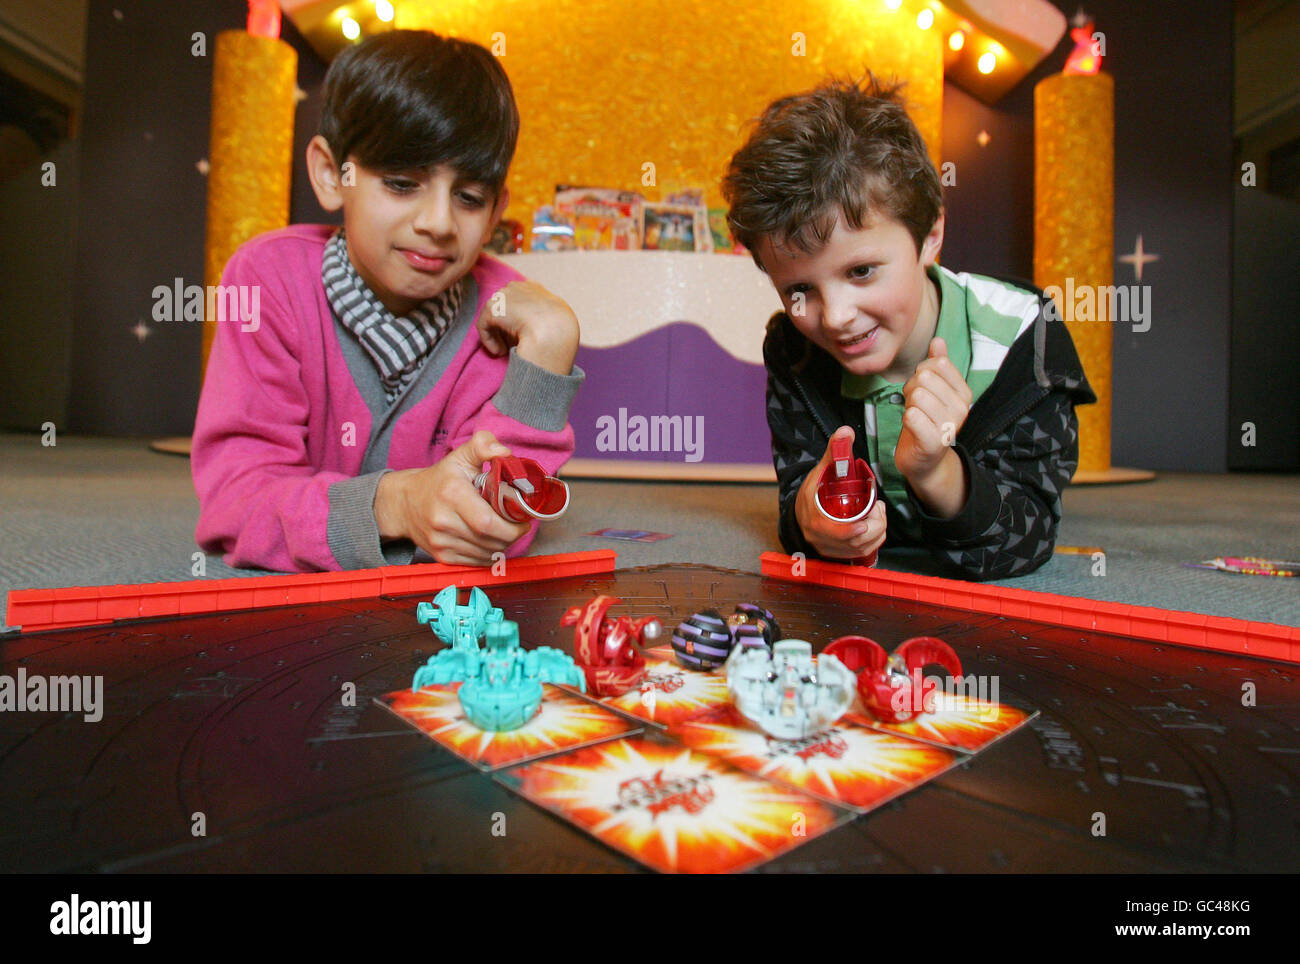 Nivi Babraa (left) and Matt Fenton both aged 10, play with the Bakugan Battle Pack from Spin Master (RRP 19.99), which has been predicted to be one of the top twelve toys this Christmas at the Toy Retailers Association's Dream Toys 2009 media preview, St Mary's Church, Marylebone, London. Stock Photo